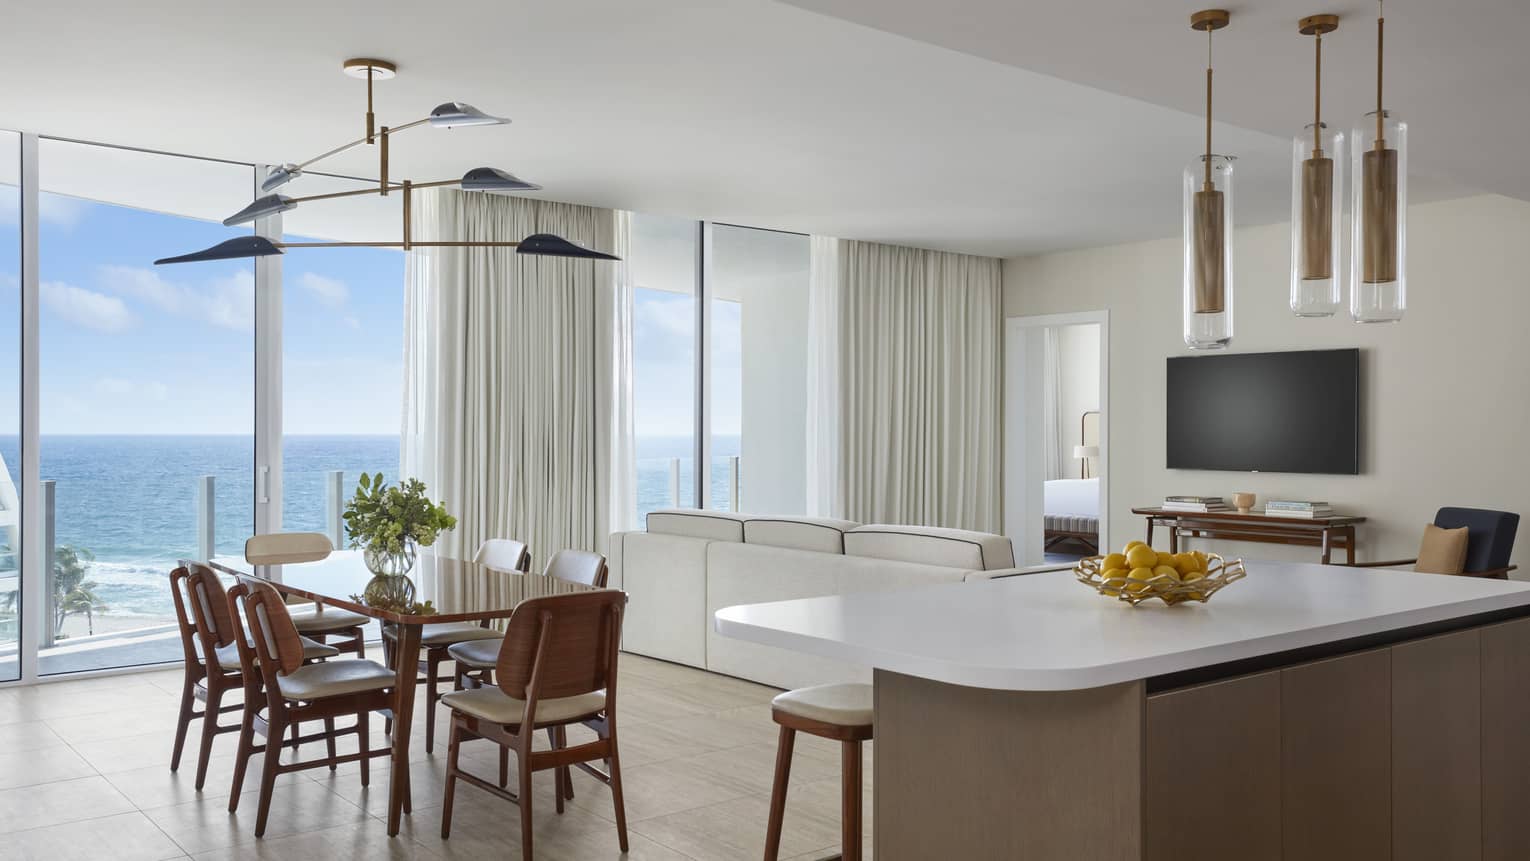 Kitchen island and dining table with ocean view